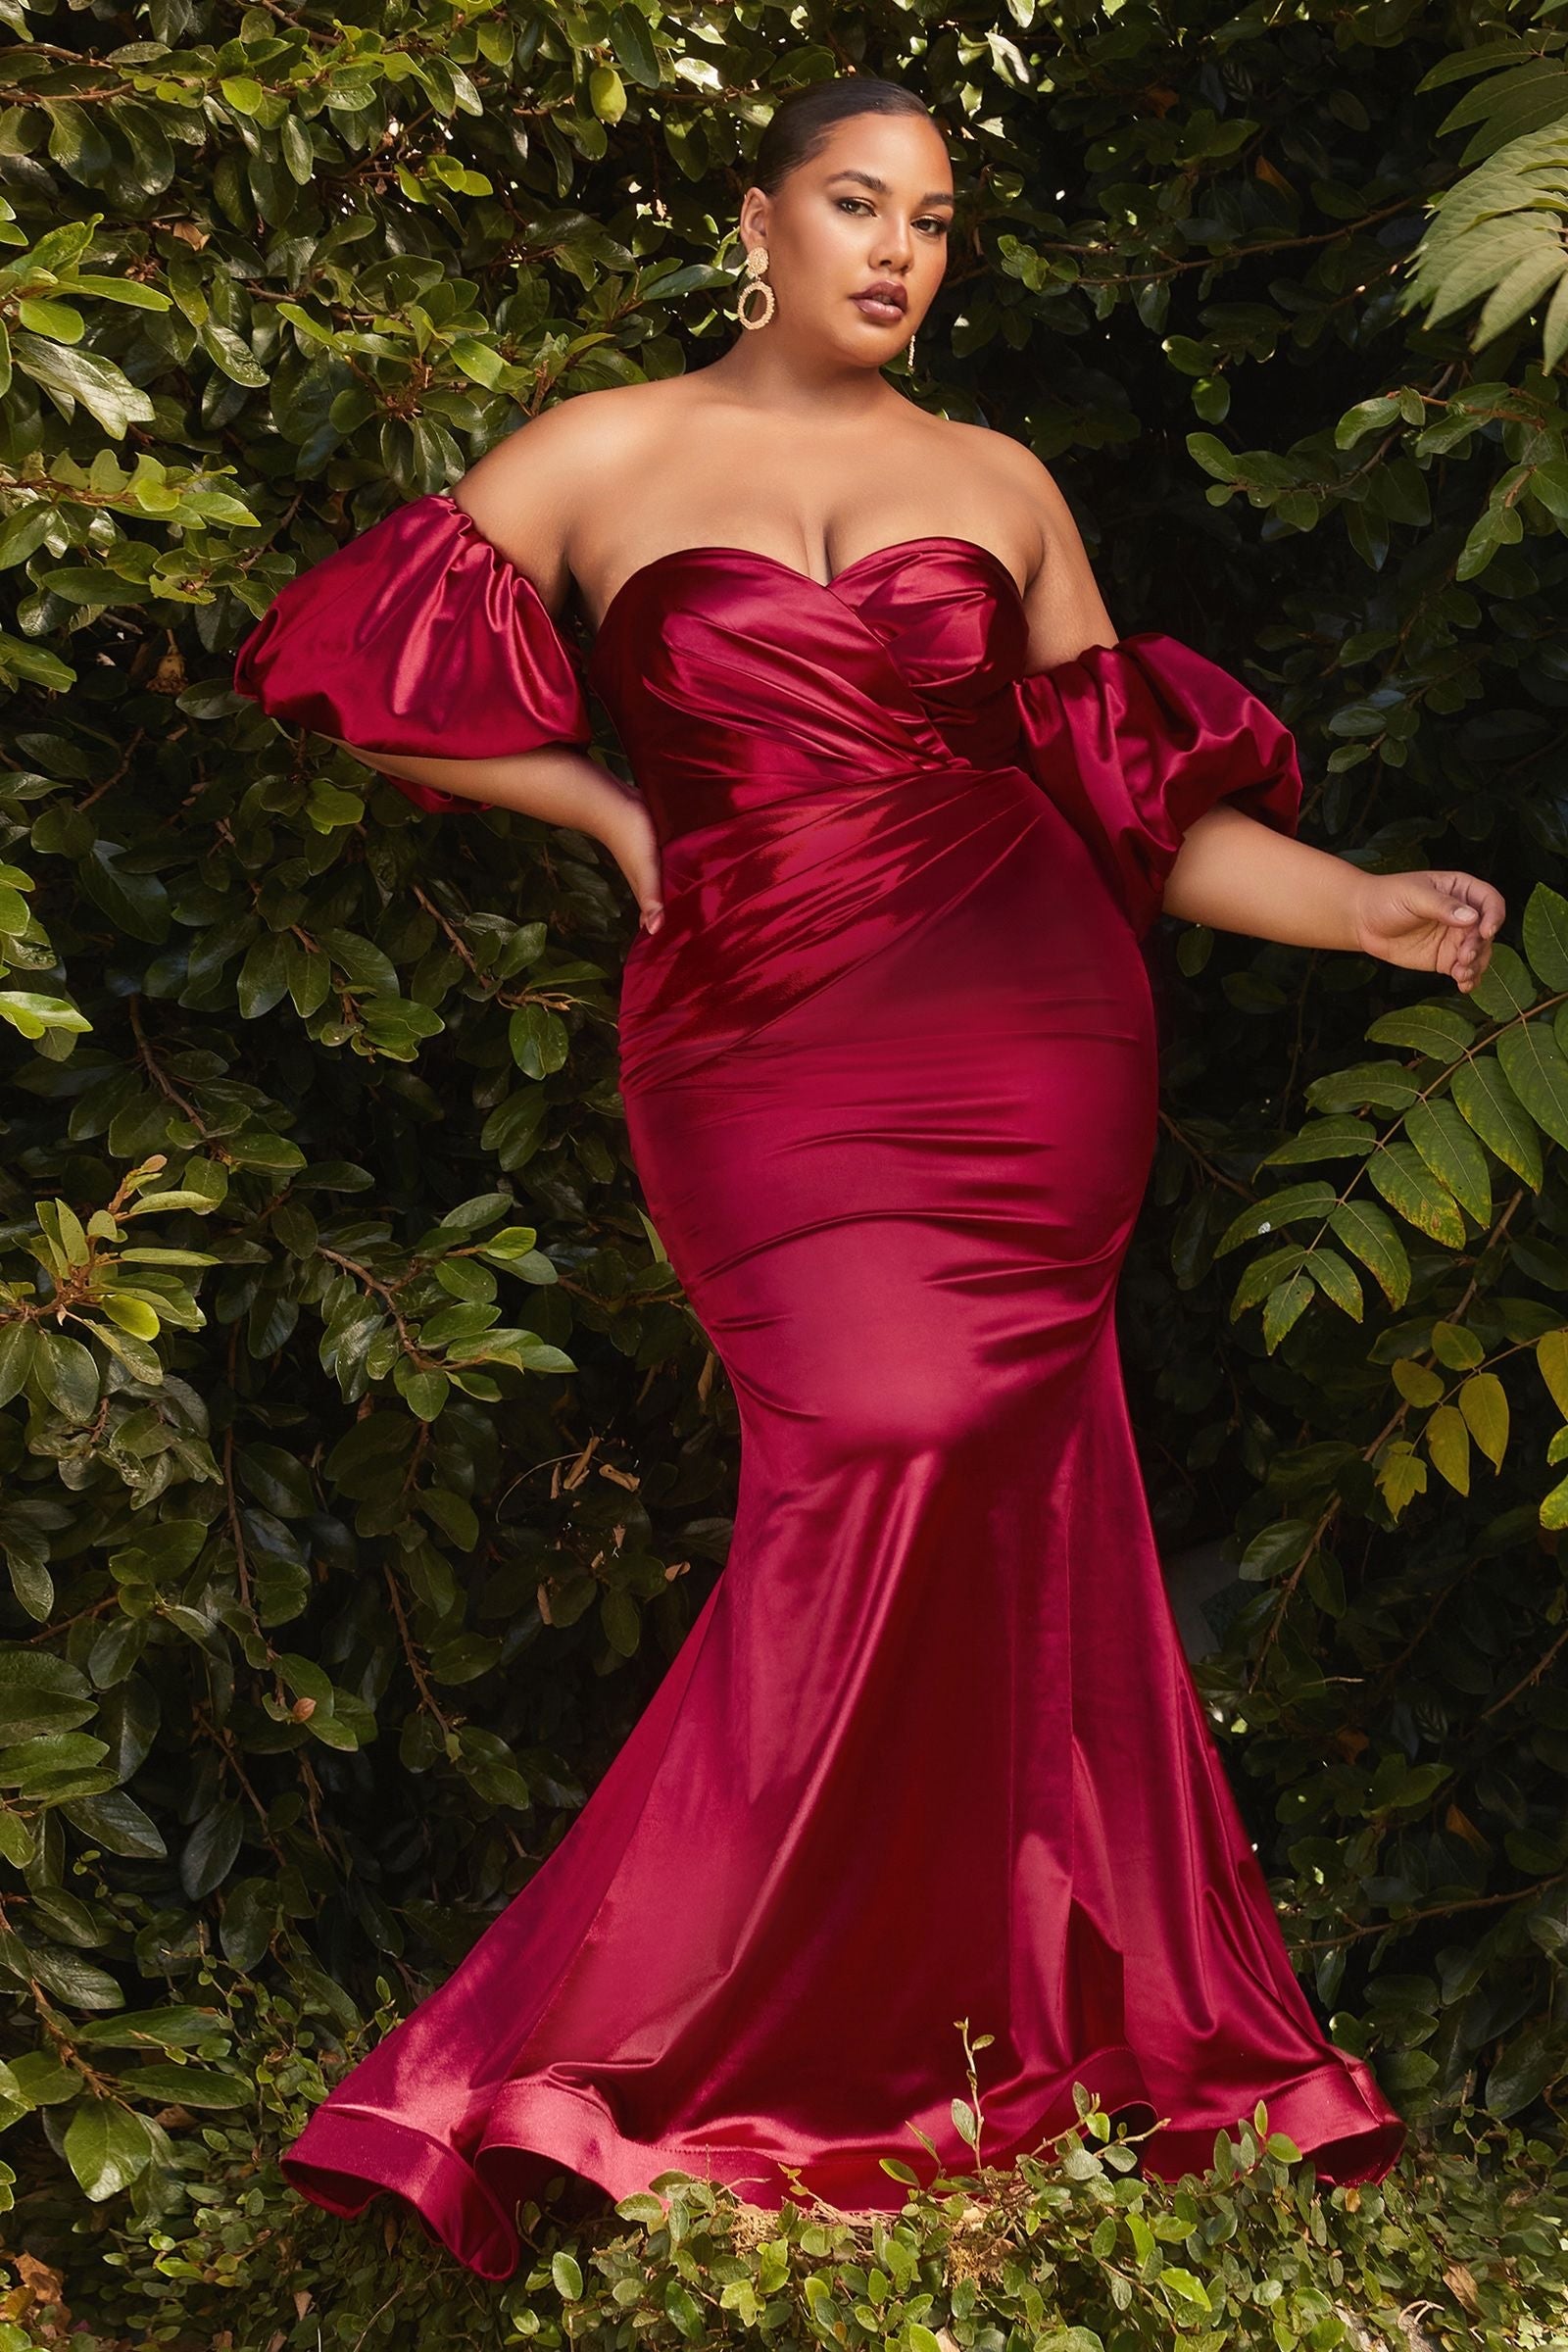 plus sizes Sleek and figure-hugging stretch satin mermaid gown with gathered sweetheart neckline.